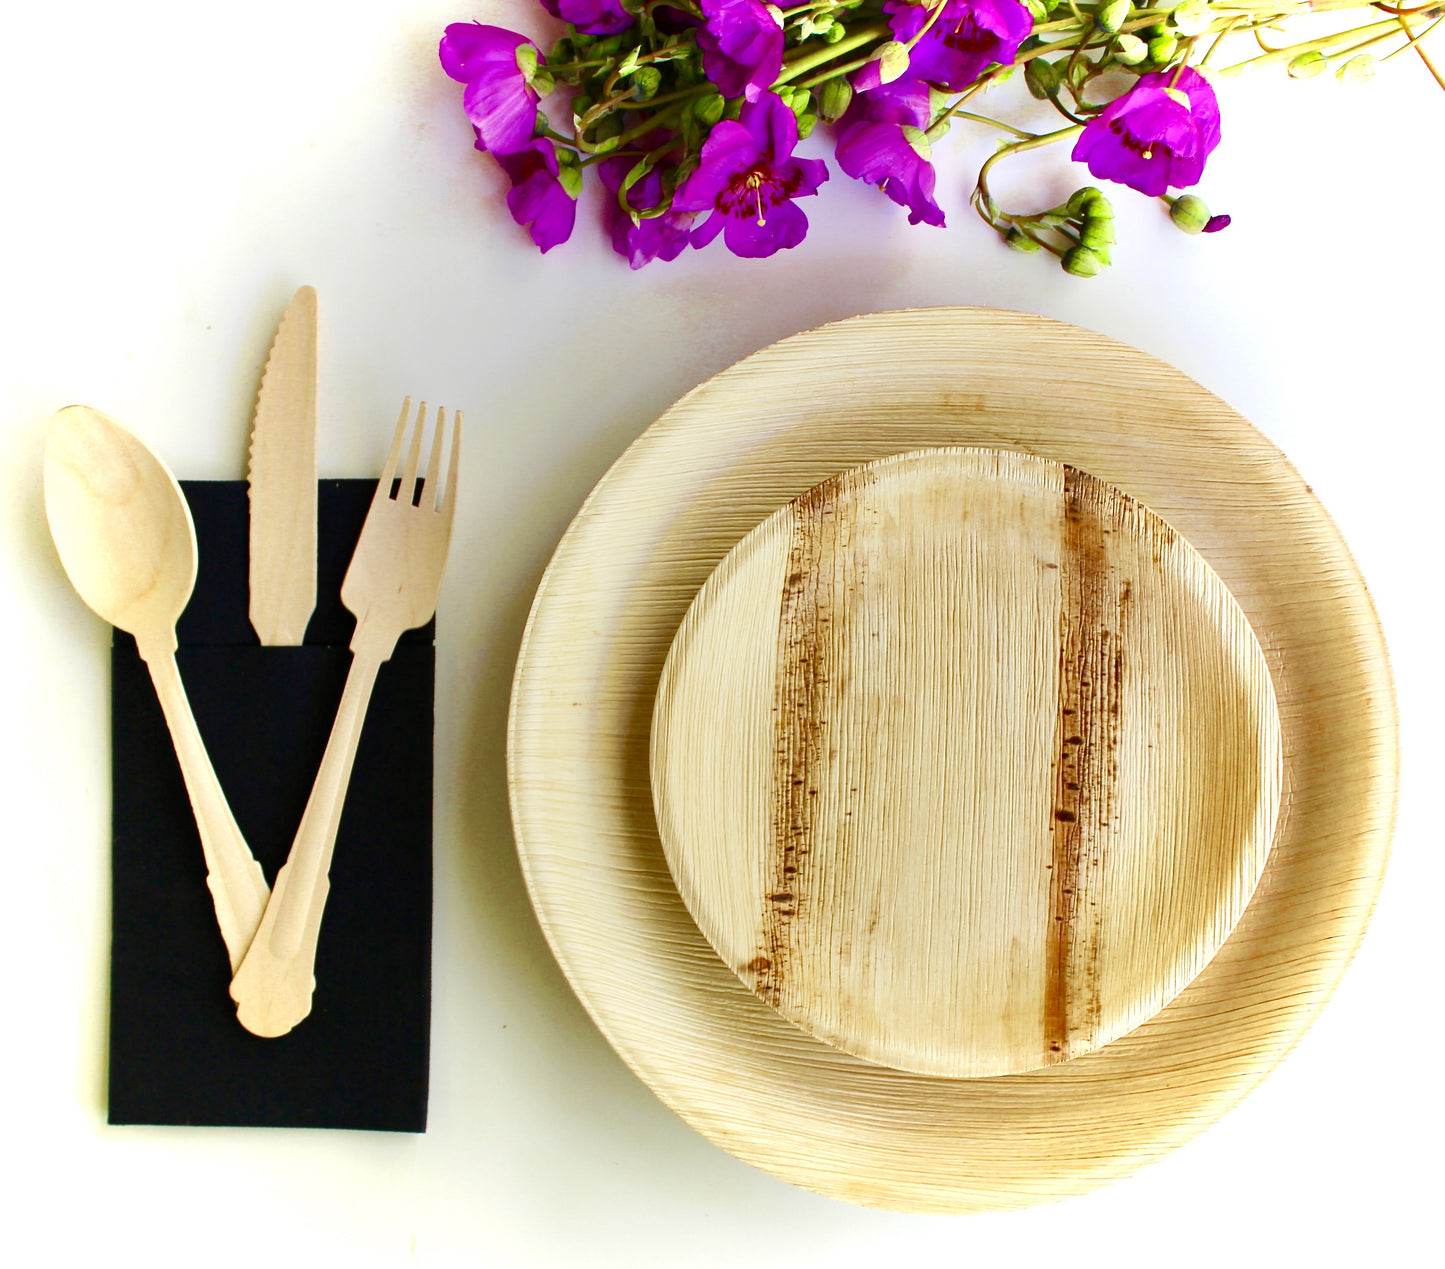 Bamboo Type palm leaf plate 10 pic 10" Round - 10 pic Haret- 30 pic Utensils 30 pic napkin